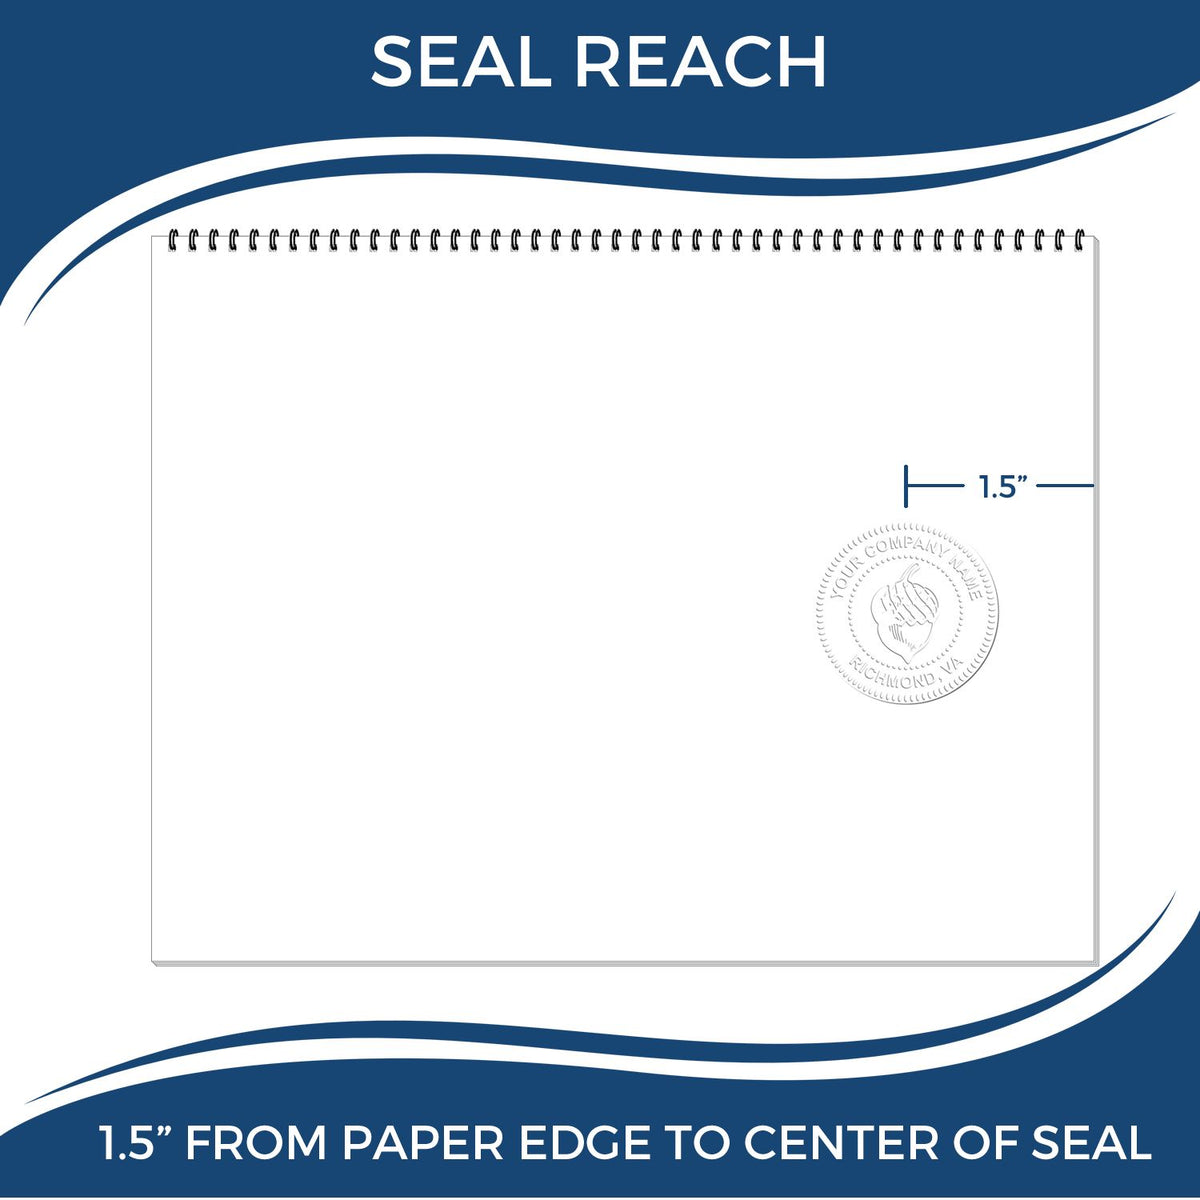 An infographic showing the seal reach which is represented by a ruler and a miniature seal image of the Handheld District of Columbia Architect Seal Embosser